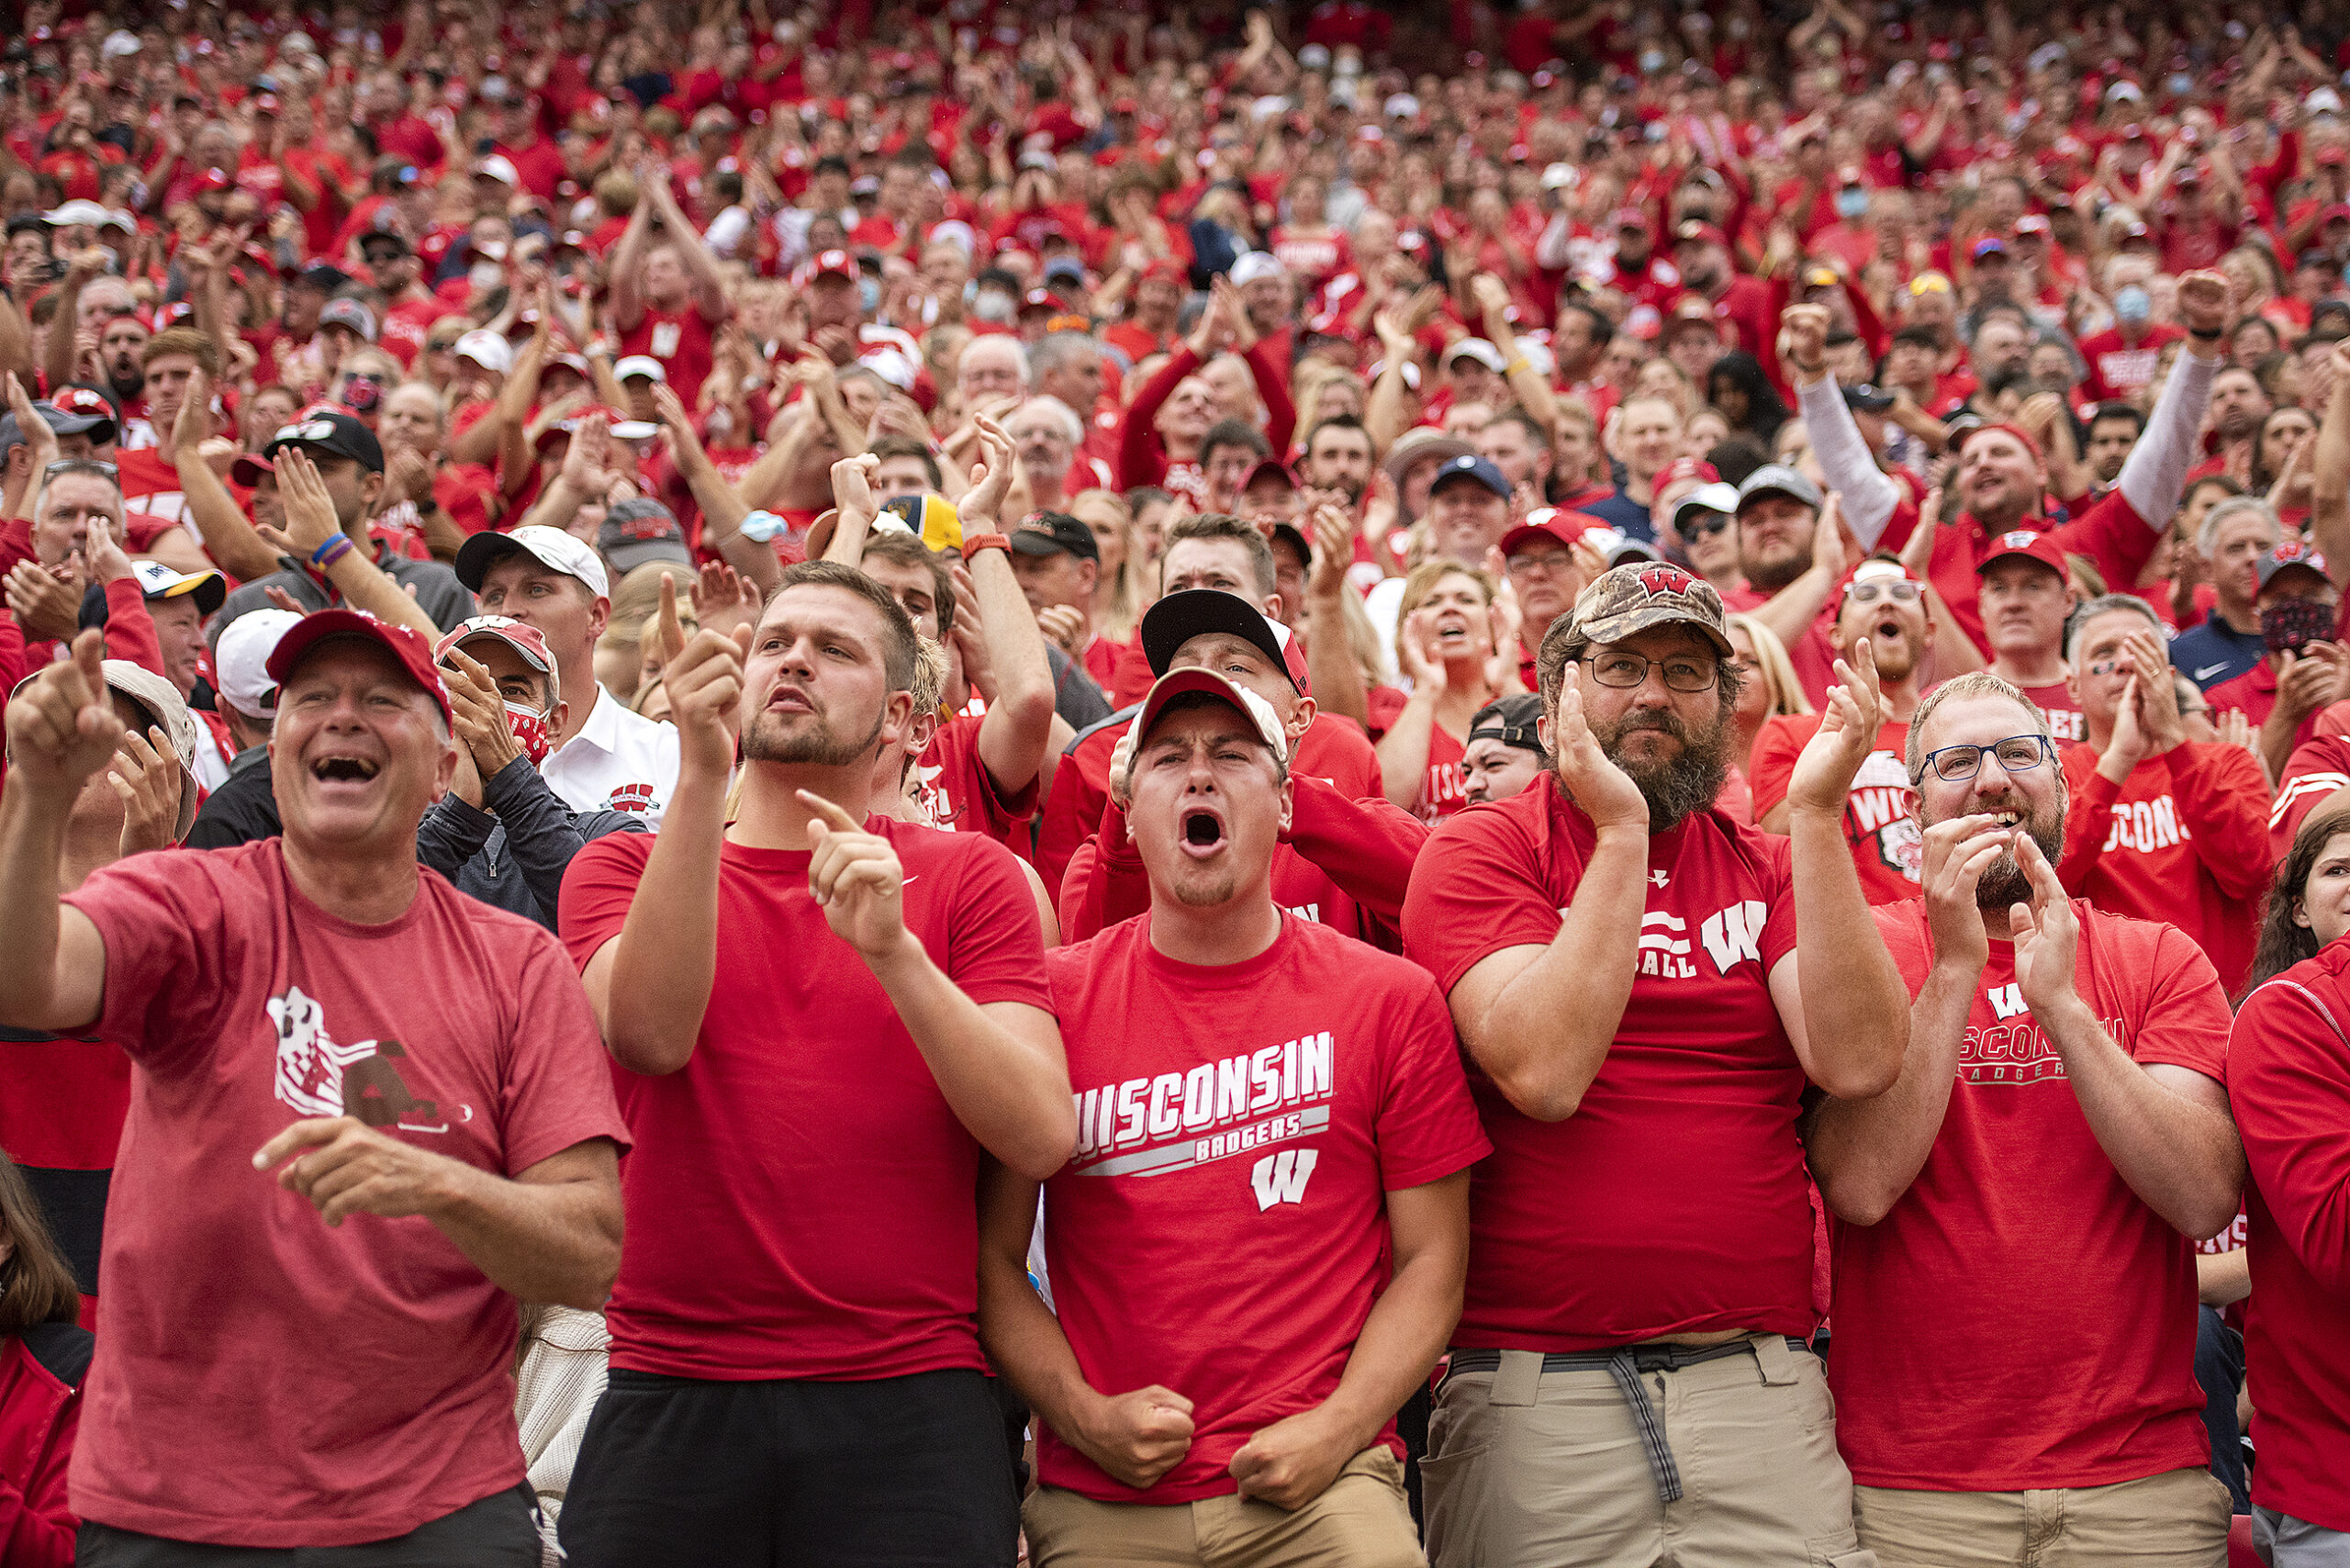 Wisconsin fans react with jubilation in the stands.